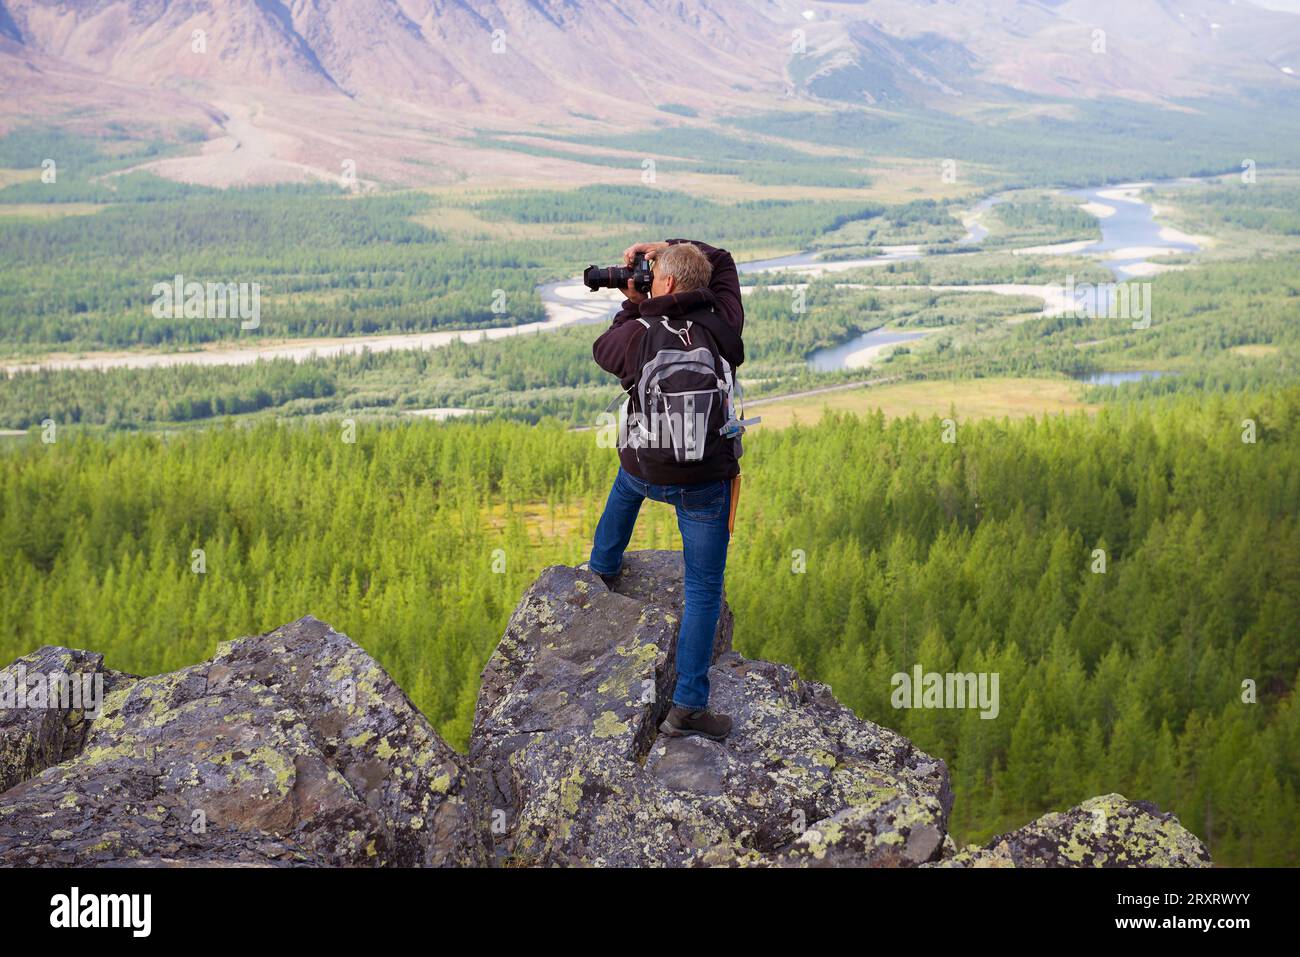 YAMAL, RUSSIA - AUGUST 20, 2018: A photographer in the mountains of the Polar Urals photographs the Sob River valley Stock Photo